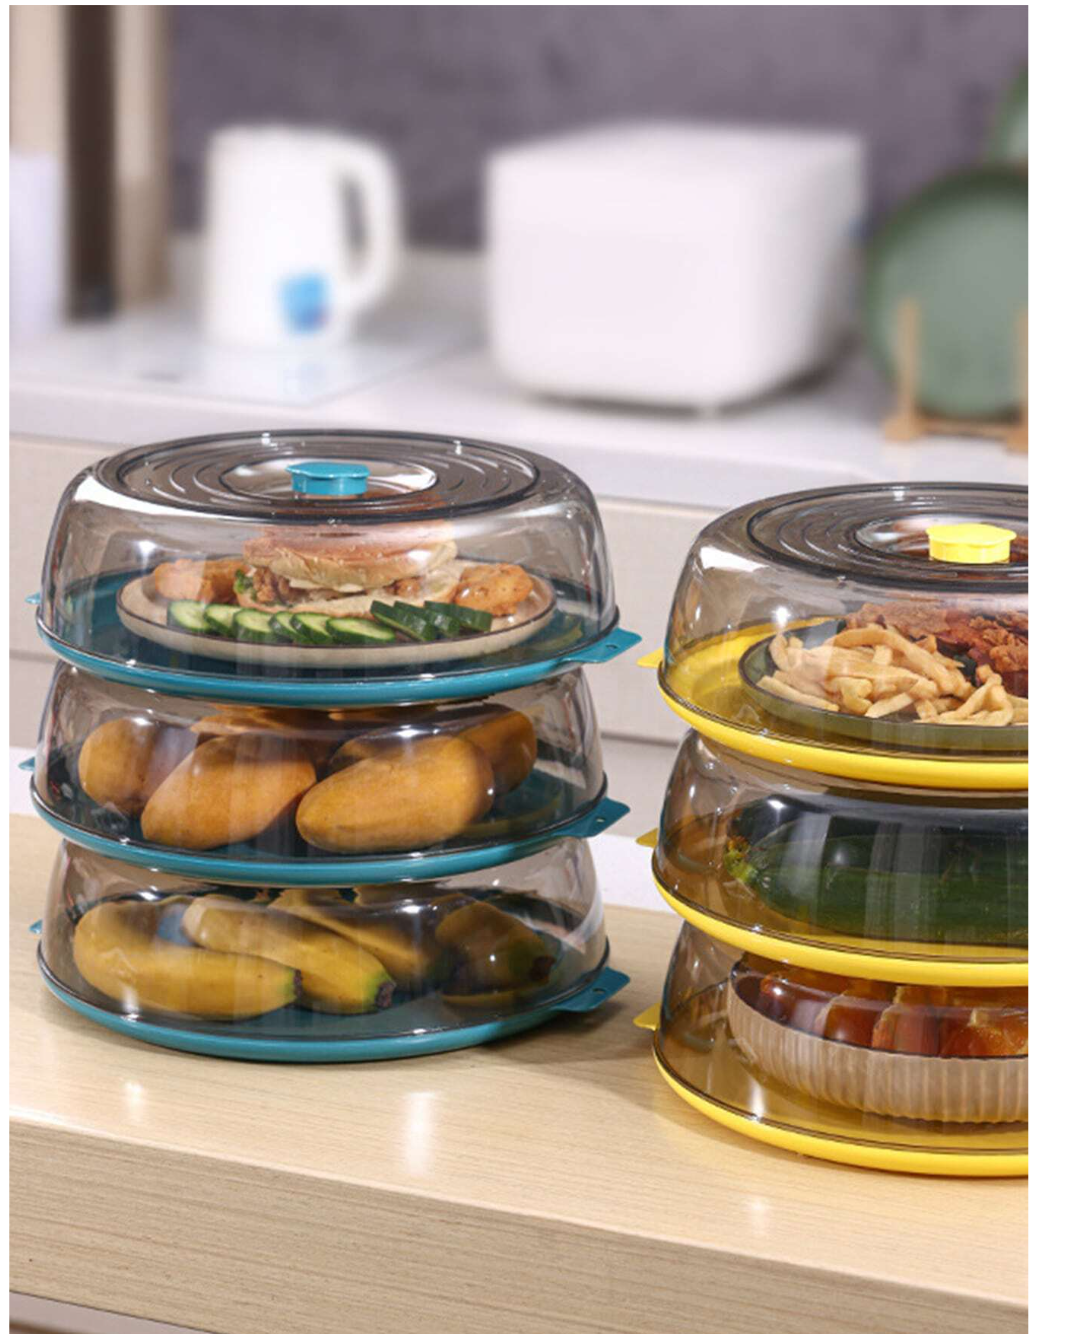 Kitchen Guardian: Clear, Resilient, and Multi-Functional! Elevate Your Culinary Haven with the Ultimate Food Cover.